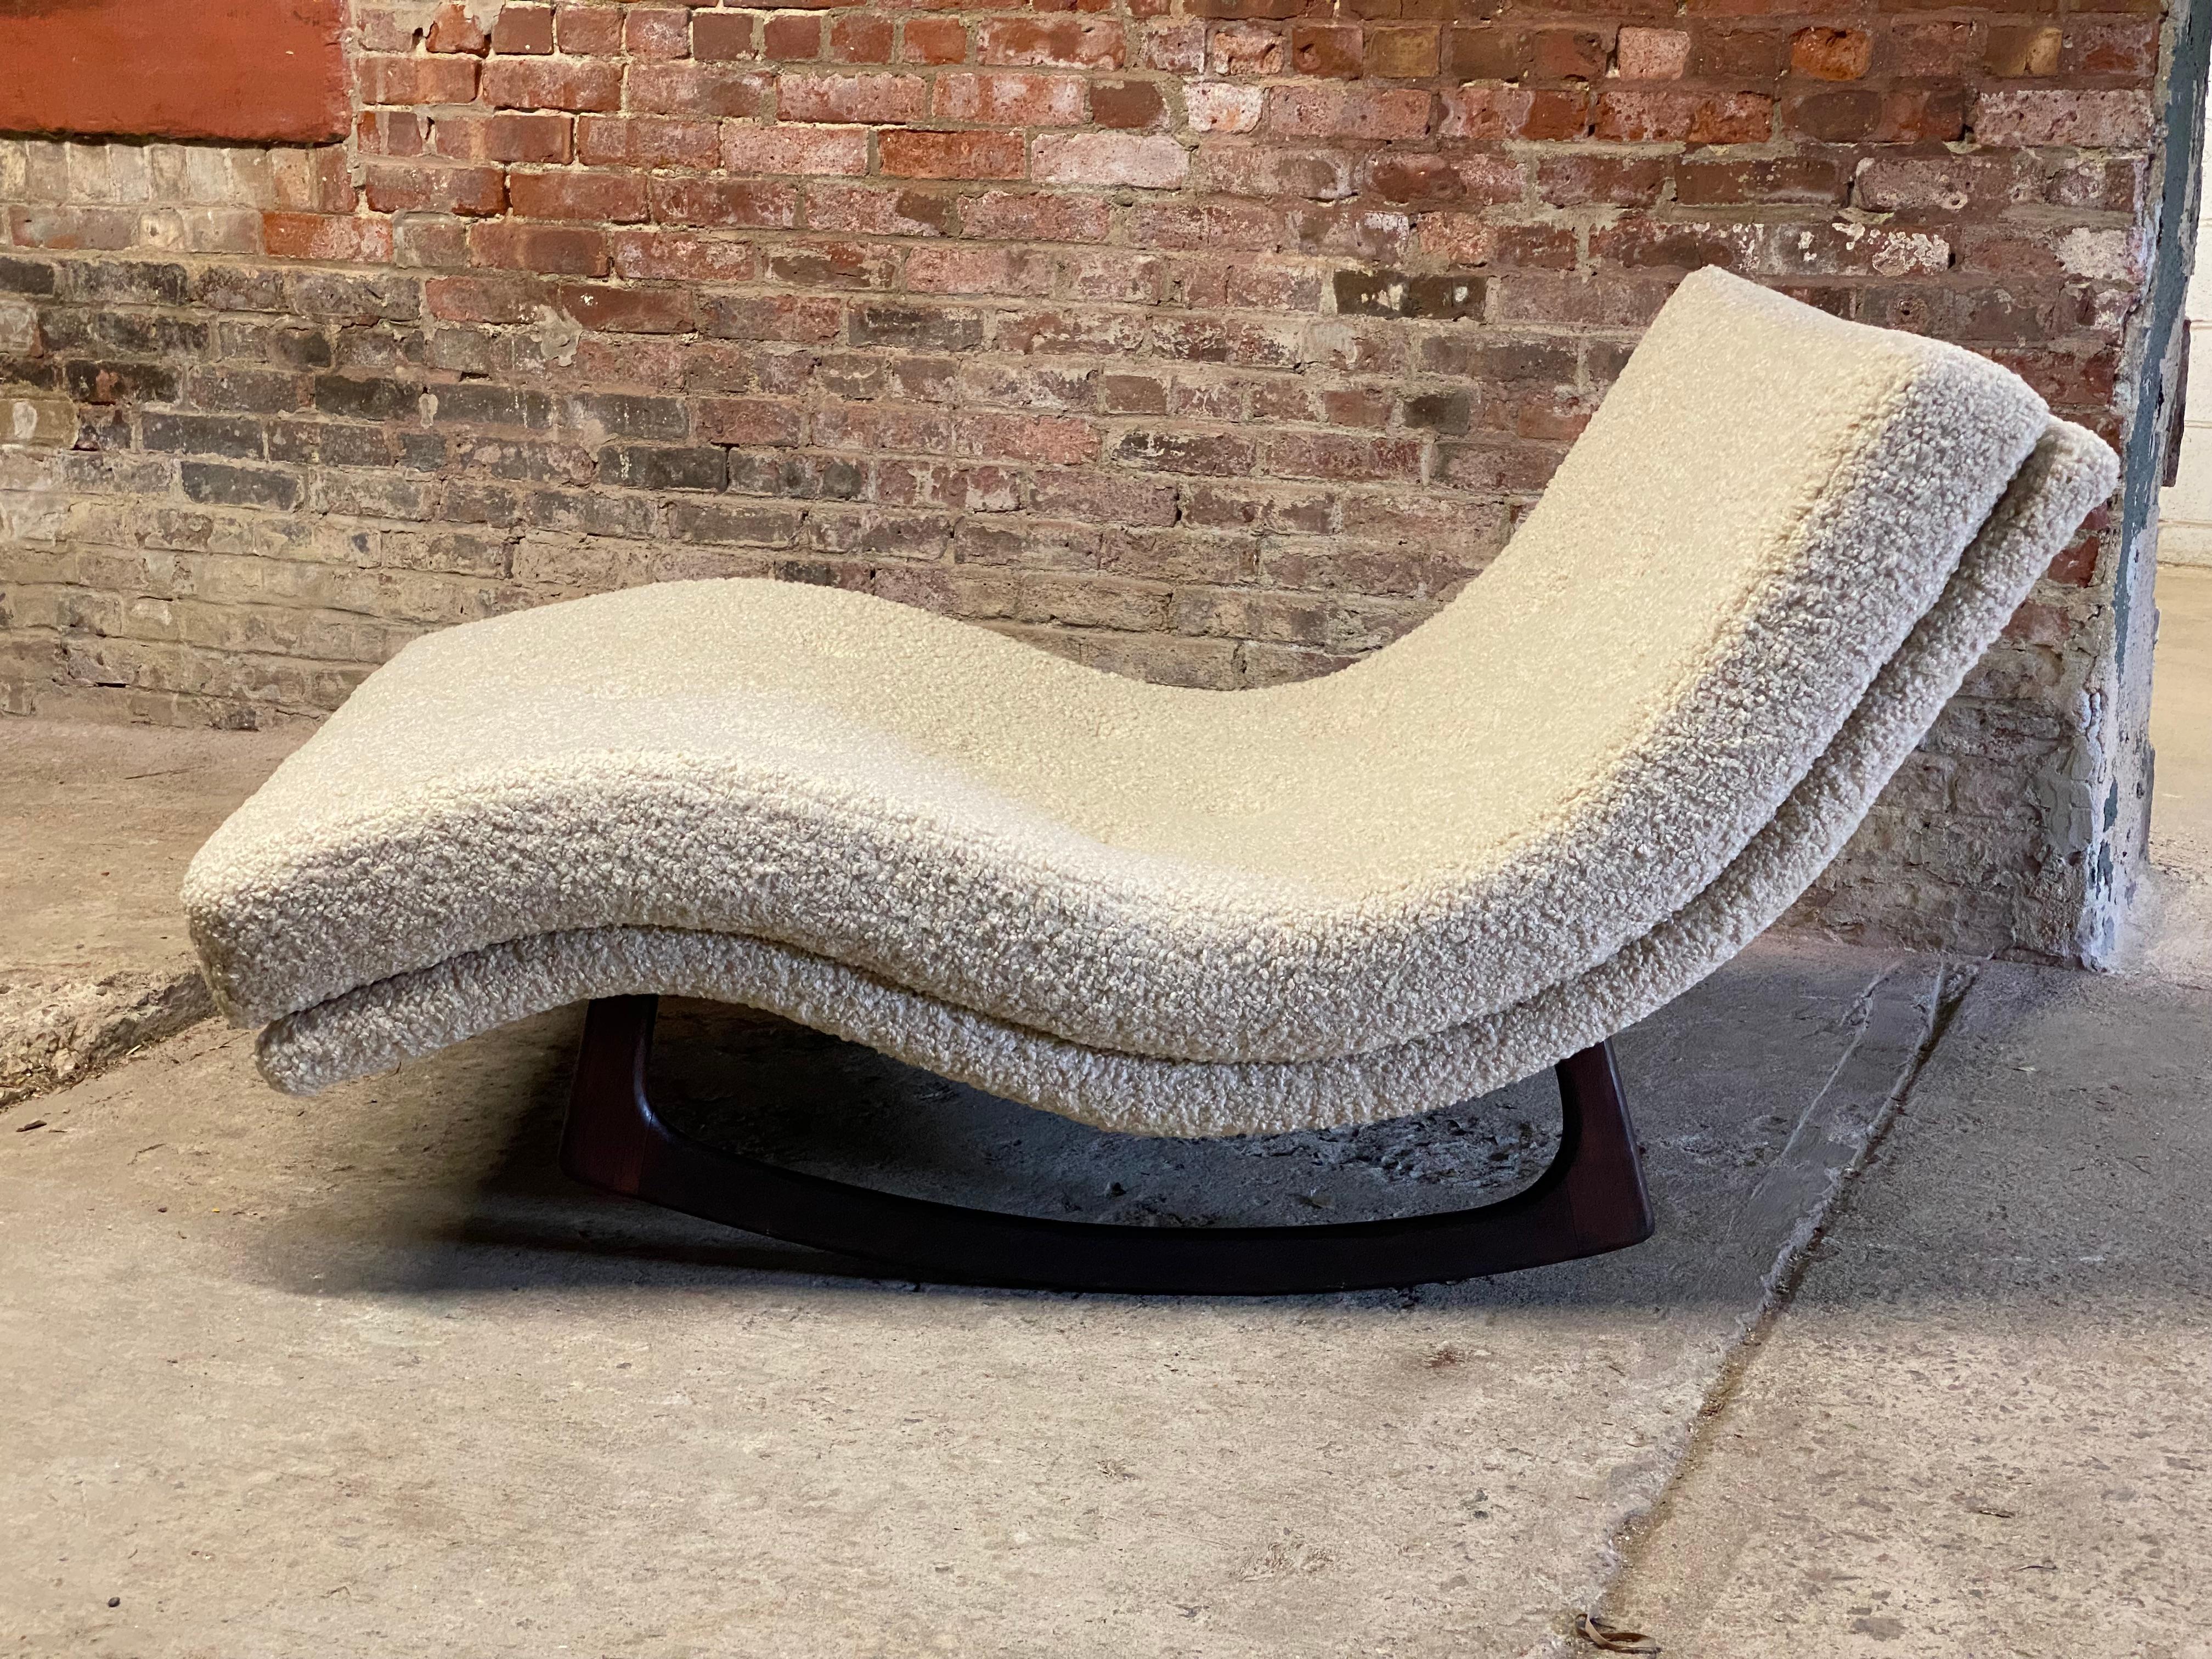 Waive chaise walnut and boucle rocker. The ultimate lounging chair for reading, a disco nap or watching a movie. Circa 1960. Solid walnut base and reupholstered in a cozy white boucle and all new foam. Structurally sound and sturdy construction.